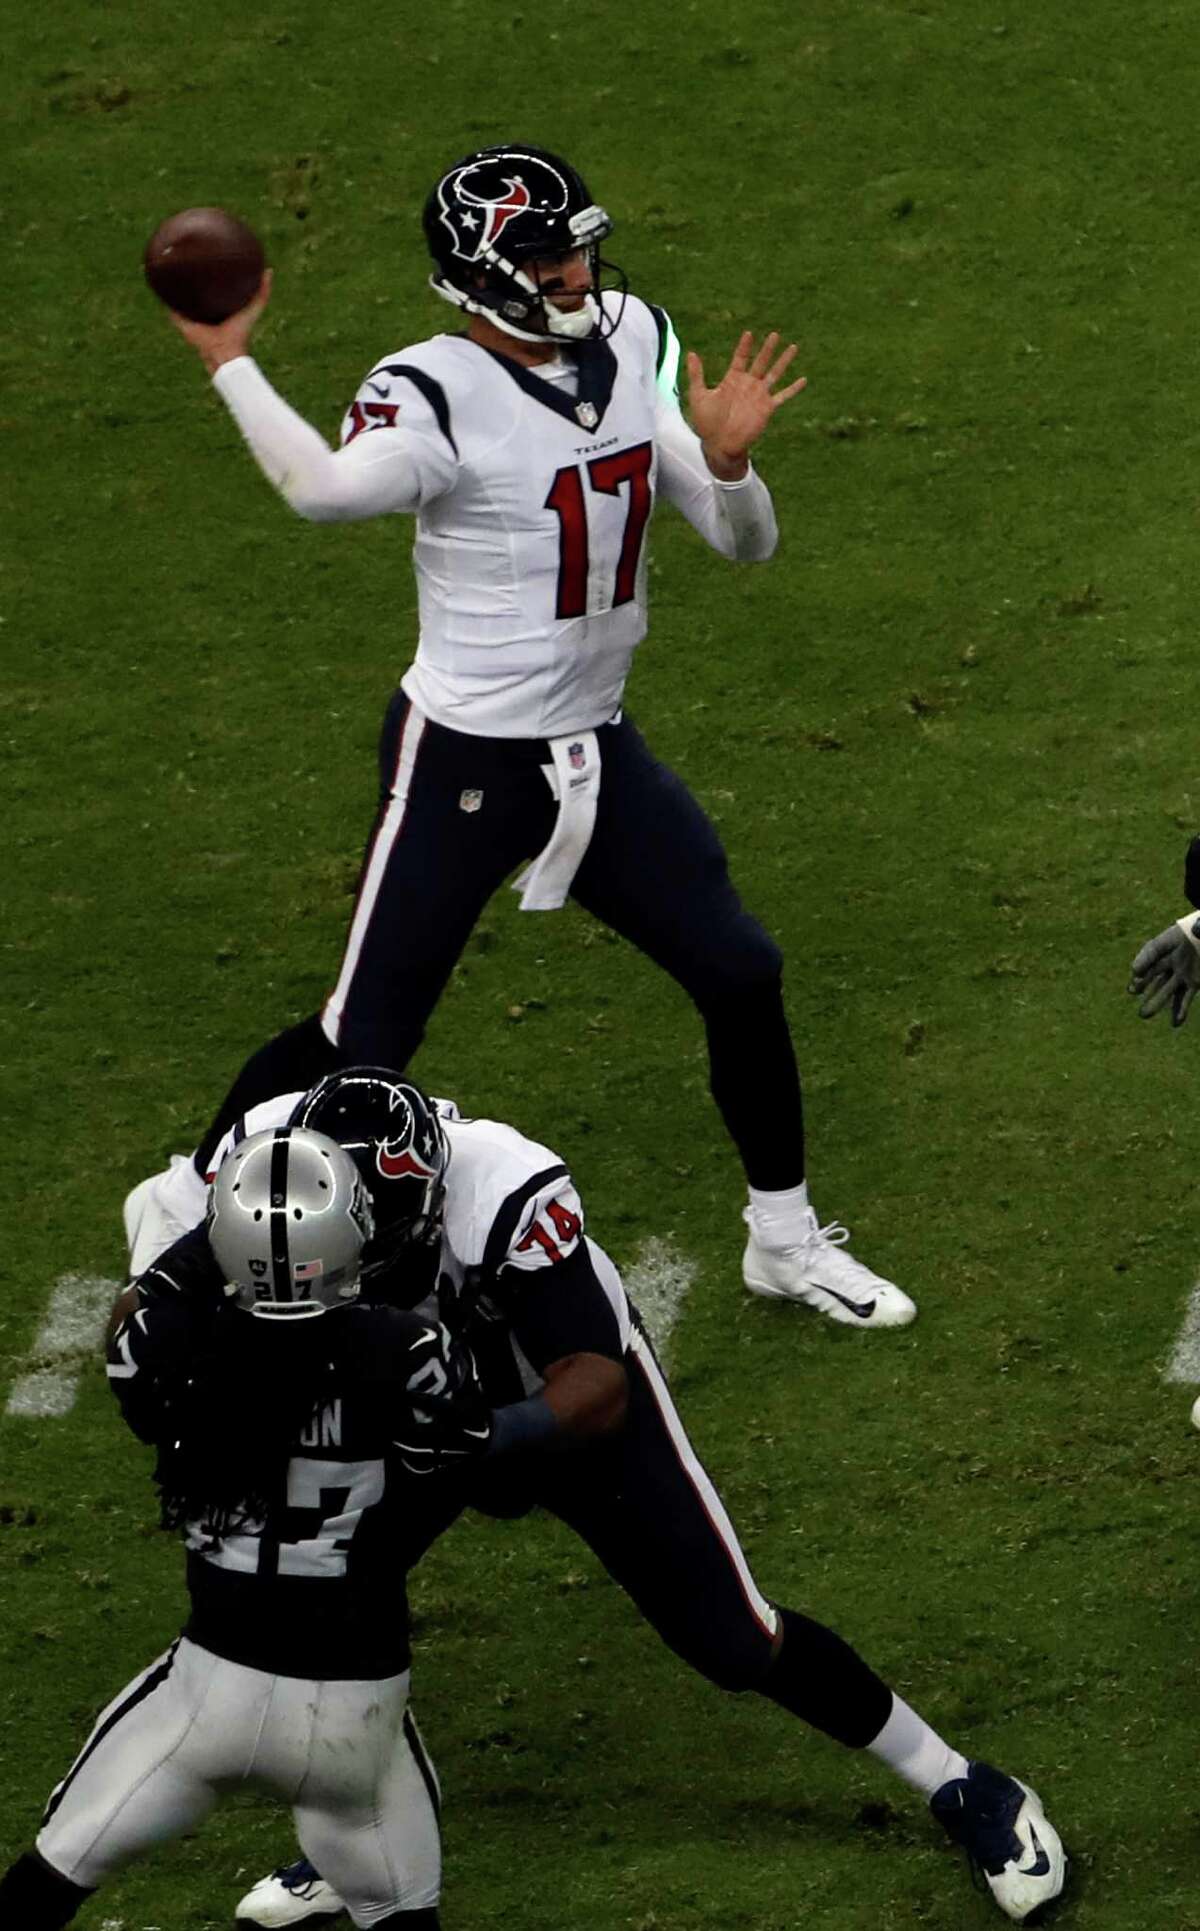 A green laser hits the jersey of Houston Texans quarterback Brock Osweiler as he looks to throw a pass during the second half of an NFL football game Monday, Nov. 21, 2016, in Mexico City. (AP Photo/Dario Lopez-Mills)